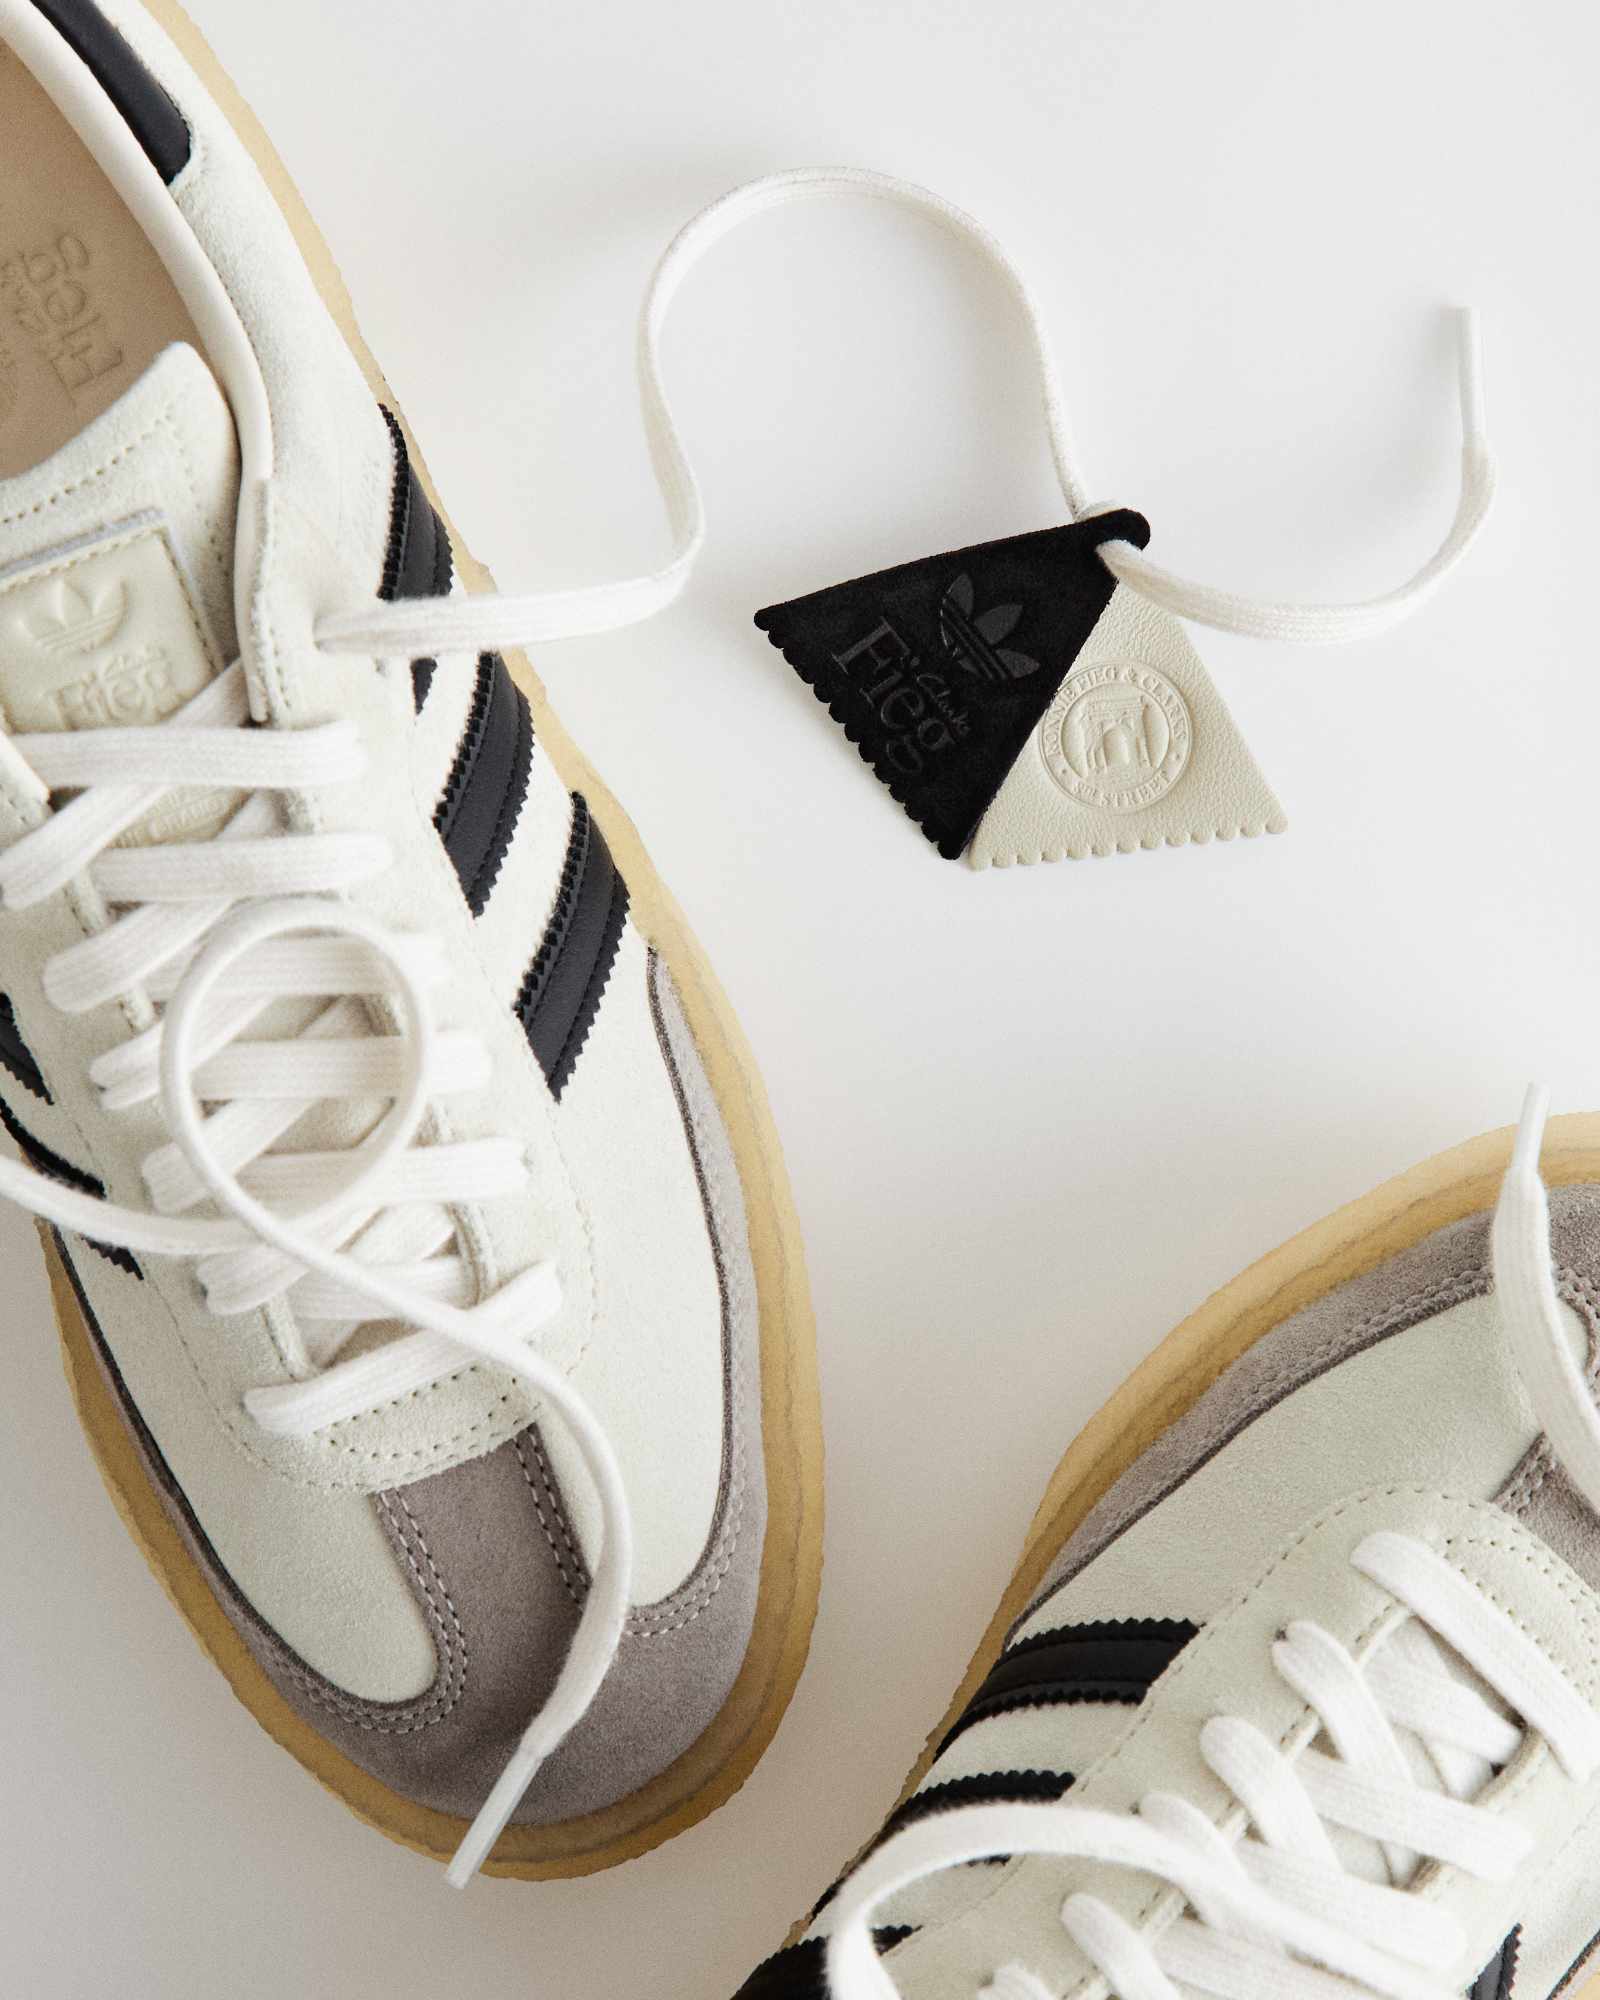 KITH x Clarks x adidas Samba sneakers in a black and white colorway